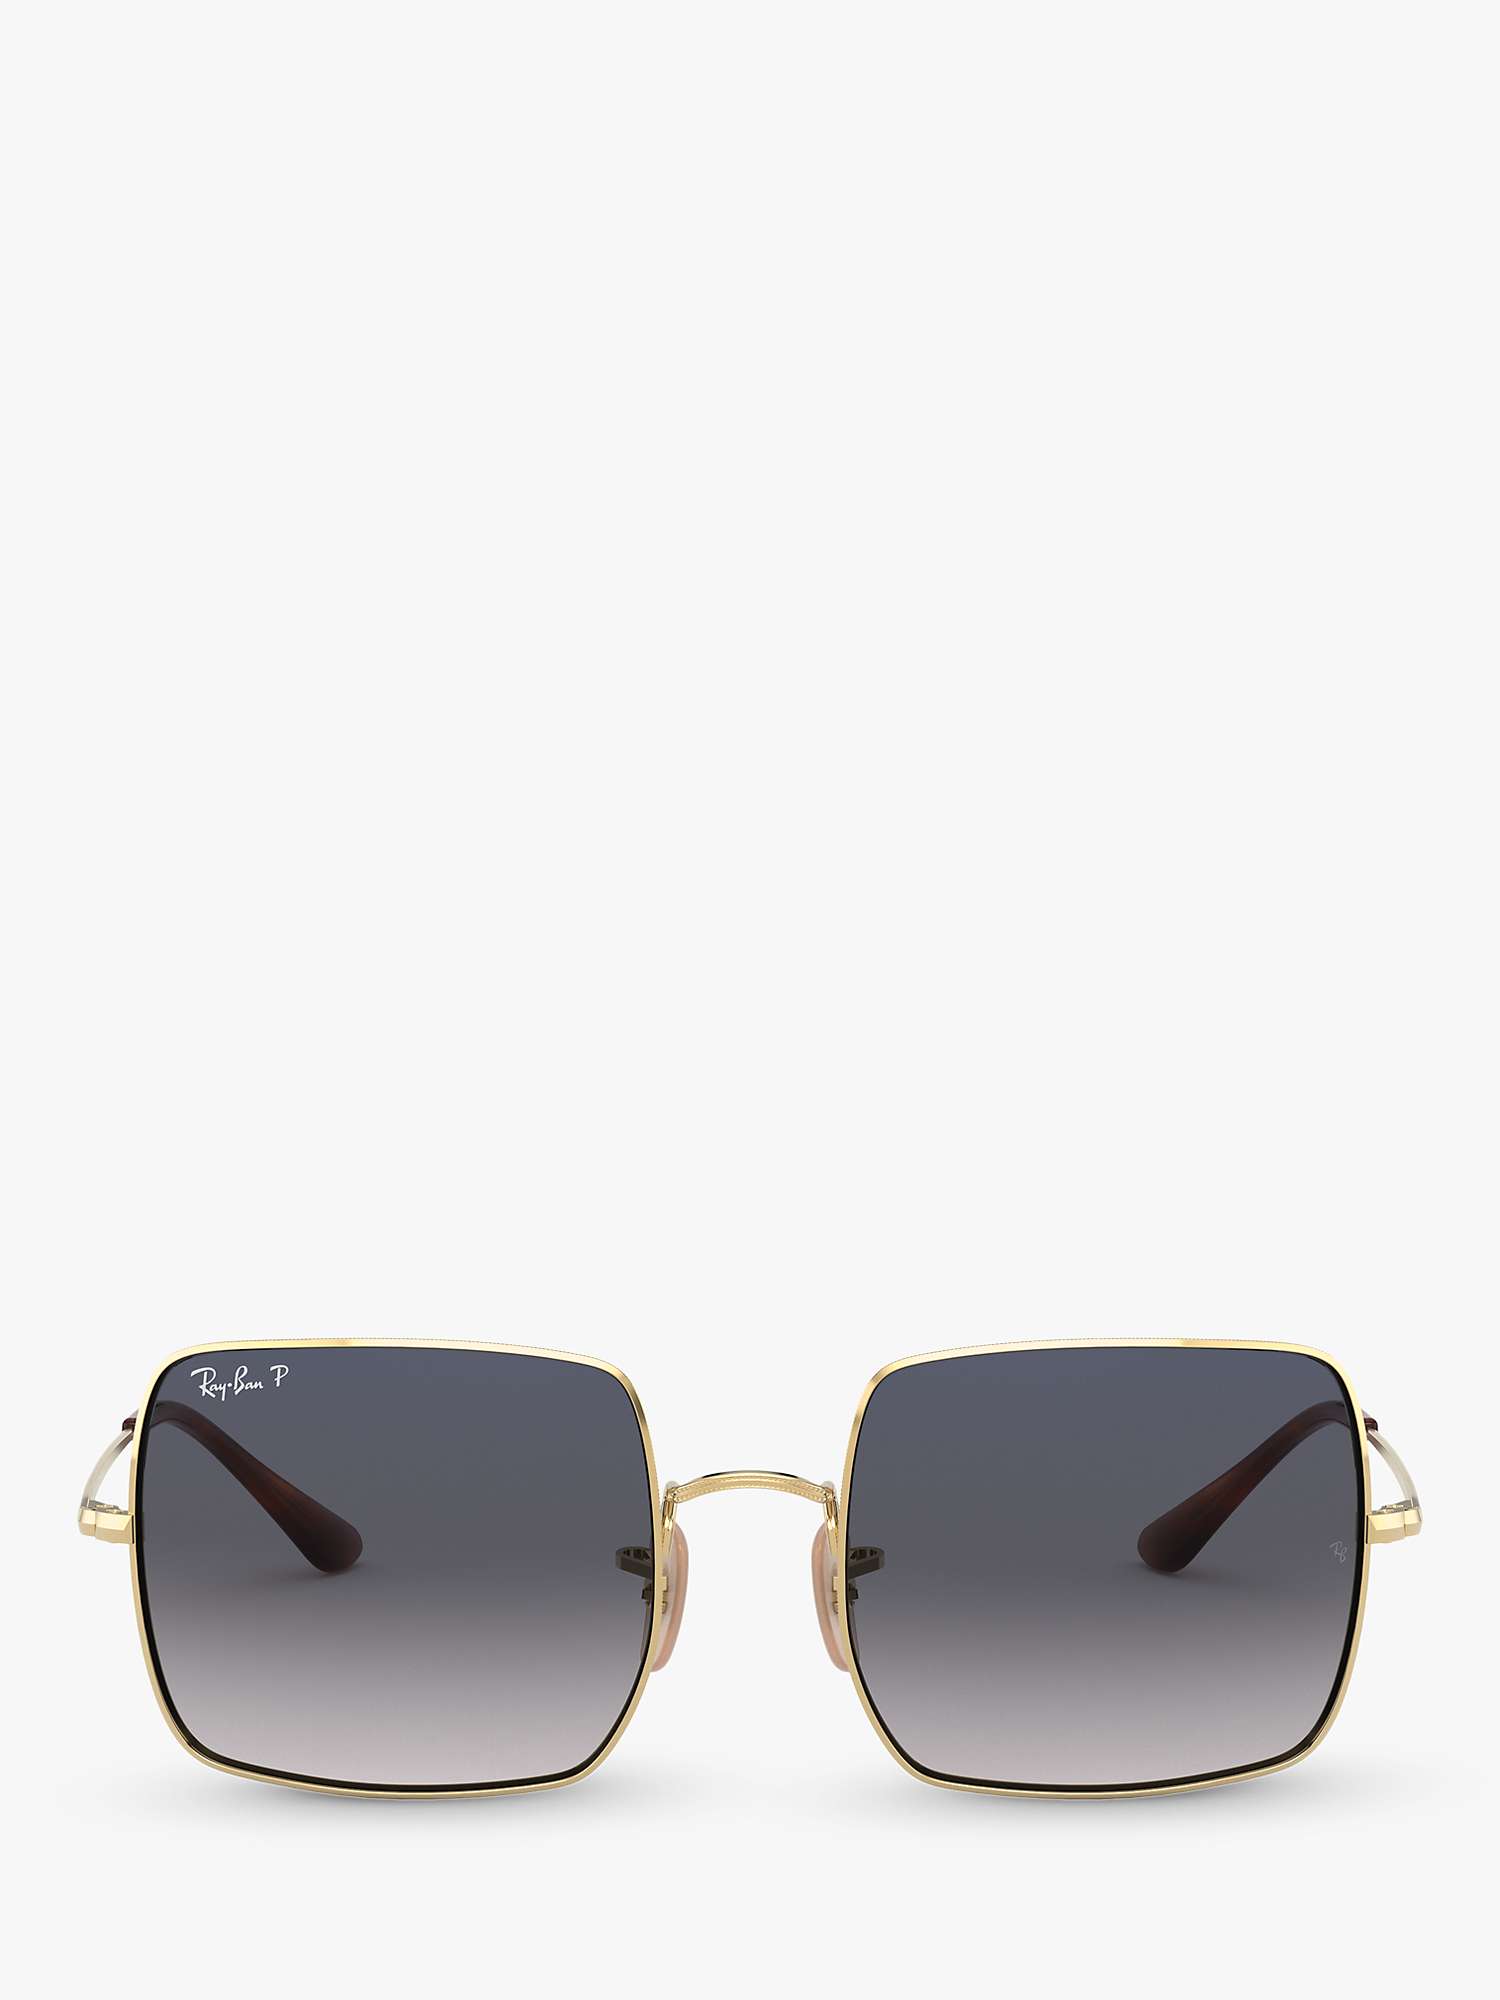 Buy Ray-Ban RB1971 Women's Square Polarised Sunglasses, Gold Online at johnlewis.com